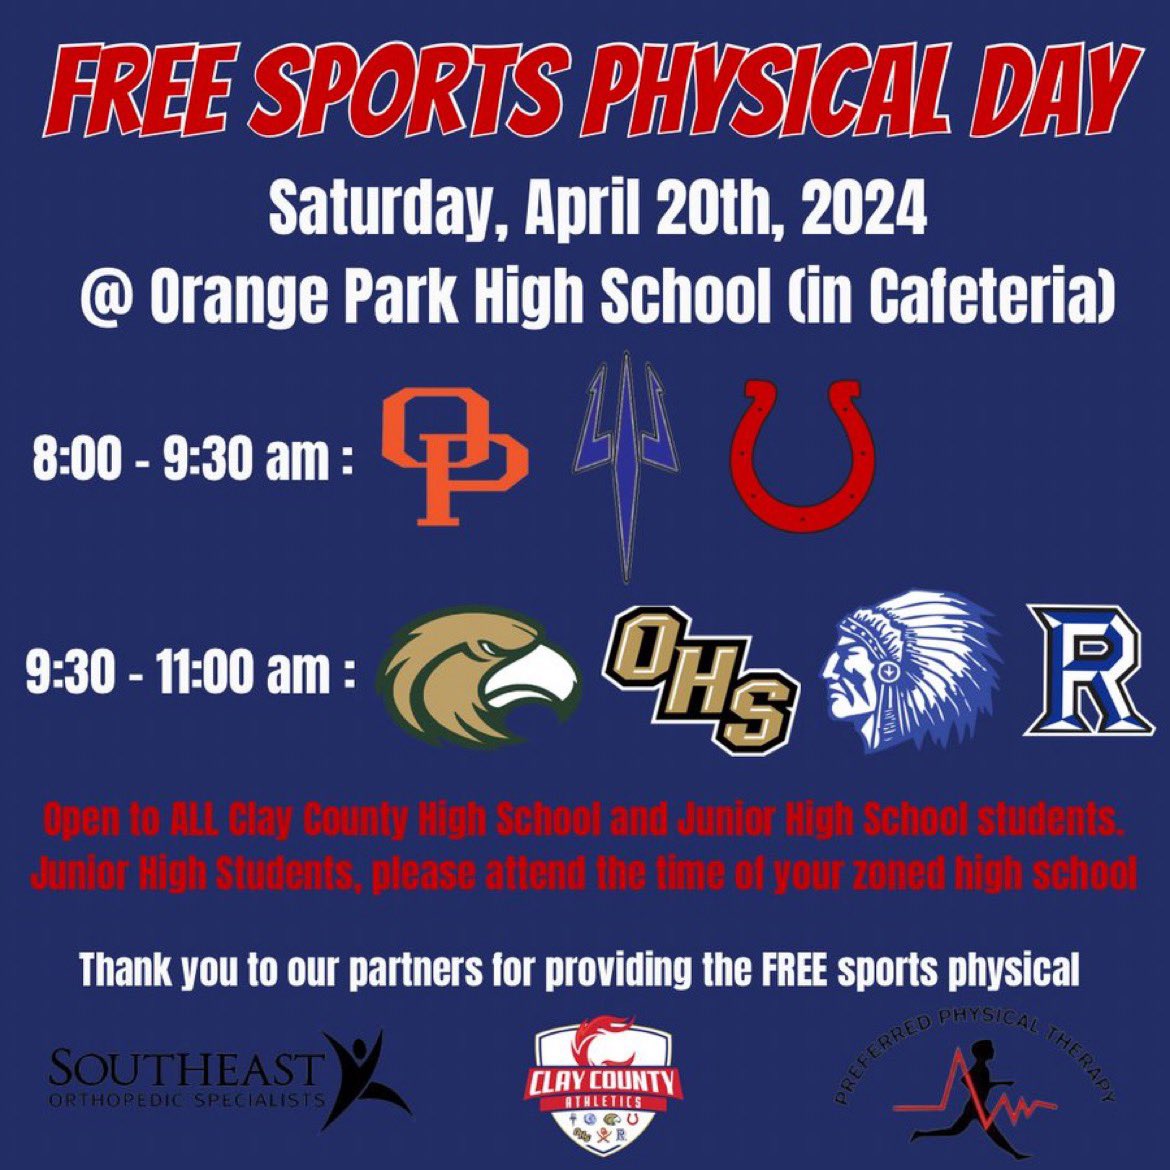 MARK YOUR CALENDARS: Free Sports Physical Day! Saturday, April 20th, 2024 at Orange Park High School! Thank you to our partners at Preferred Physical Therapy and Southeast Orthopedics for providing FREE SPORTS PHYSICALS to our student athletes!